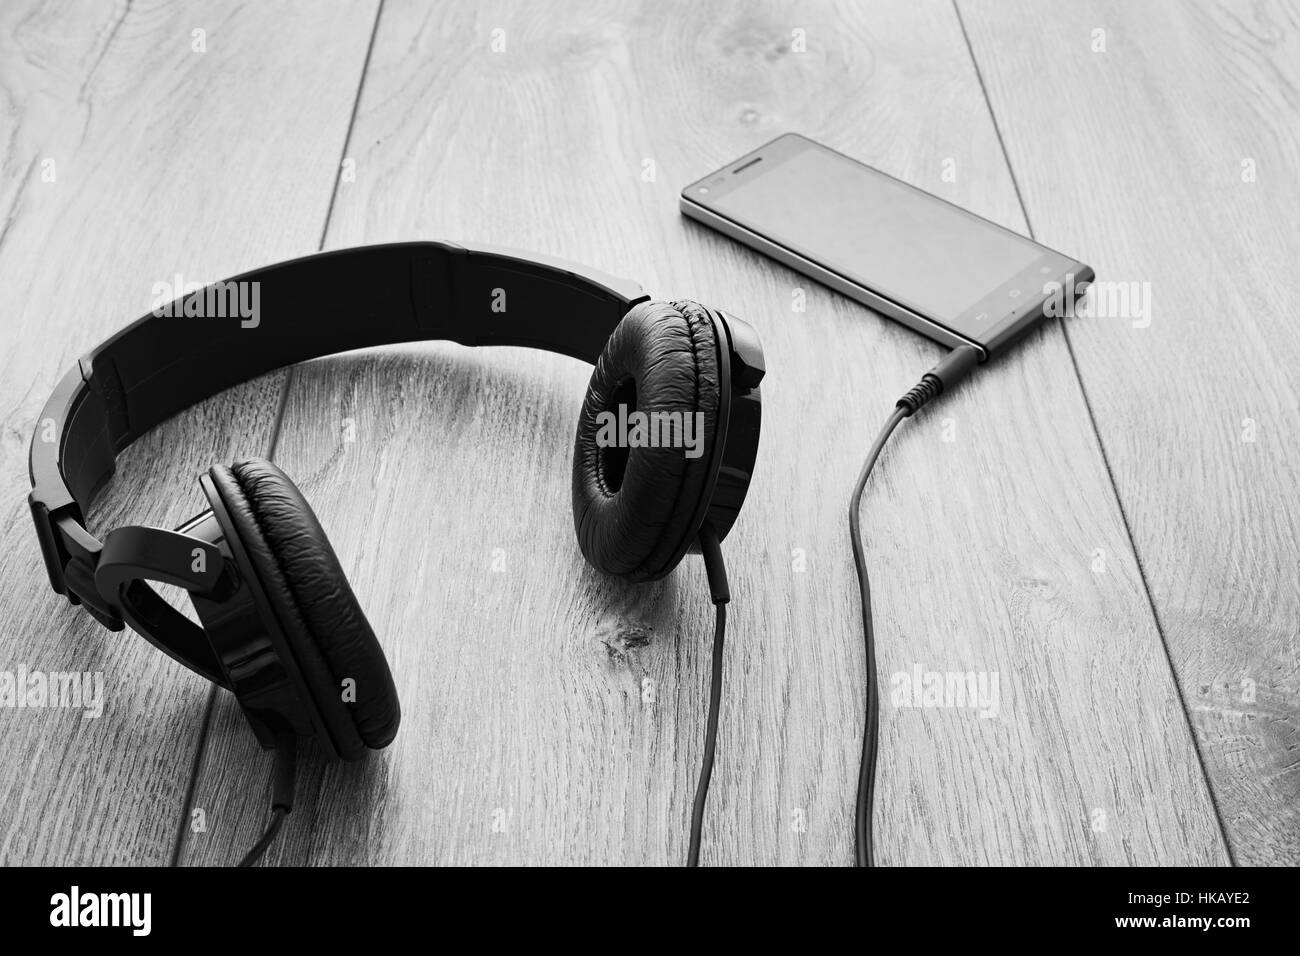 Black smartphone and black headphones on wood background. Selective focus on right earpiece of headphones. Black and white. Stock Photo